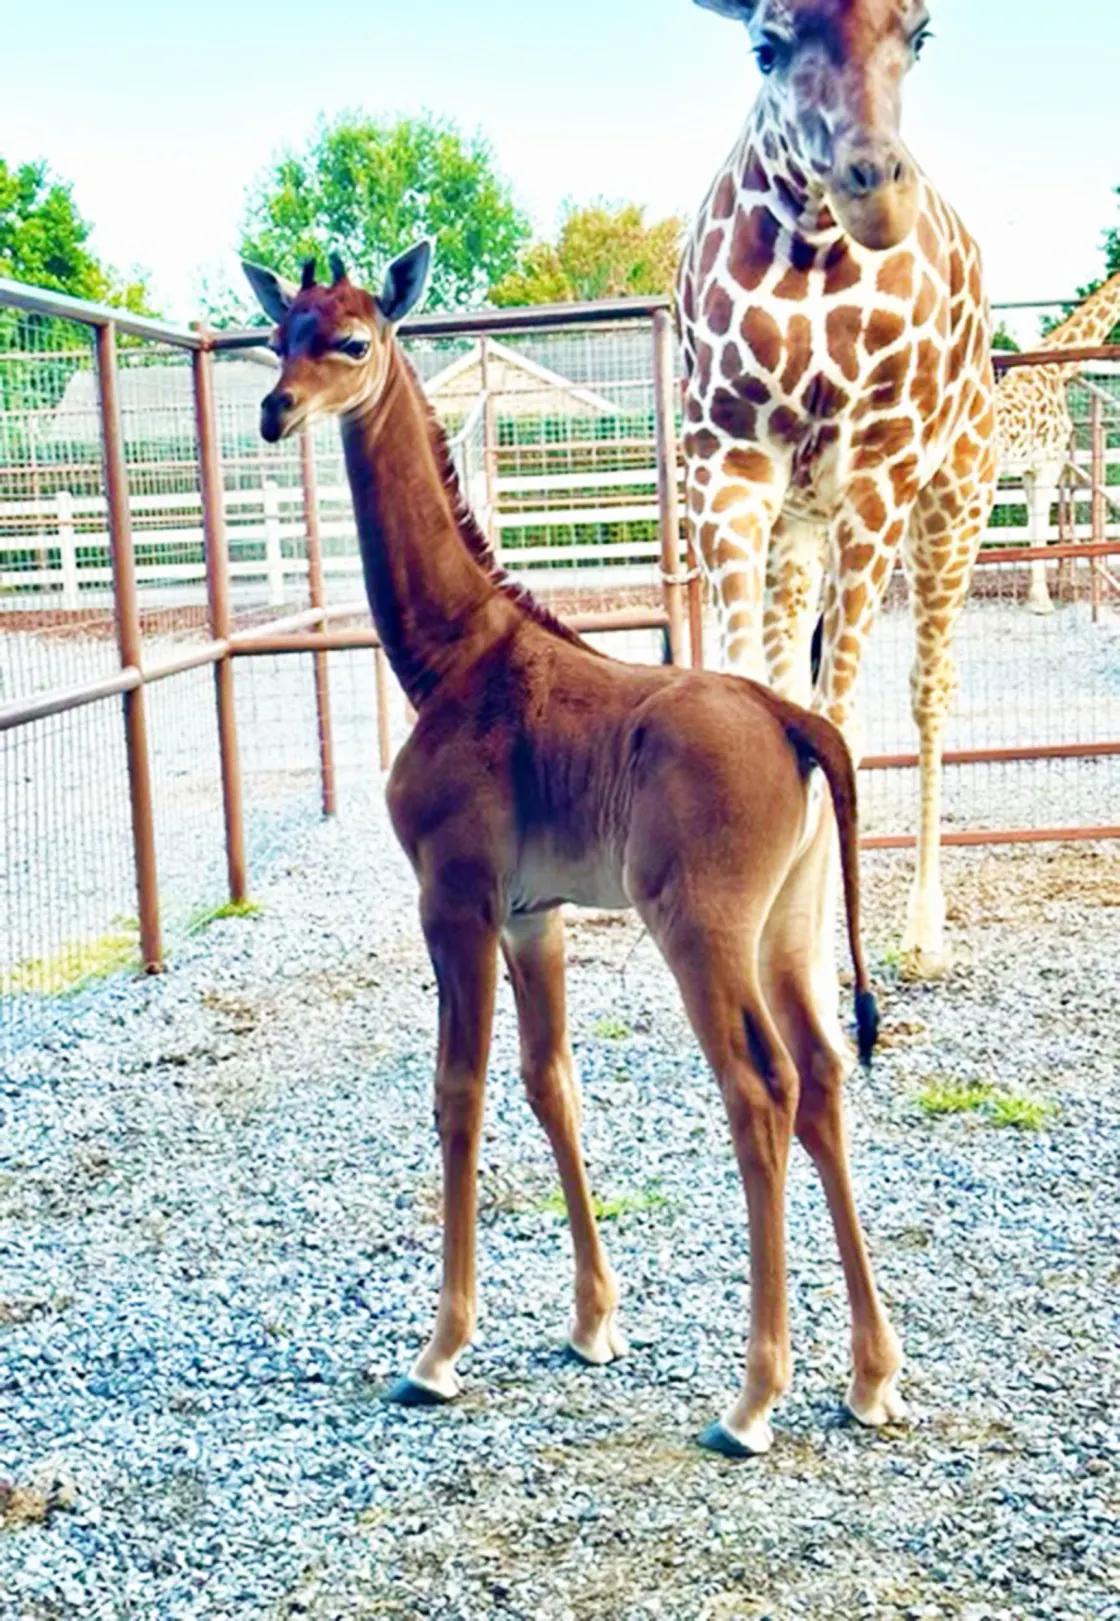 Rare solid-colored giraffe born at Brights Zoo sparks global conservation concern 